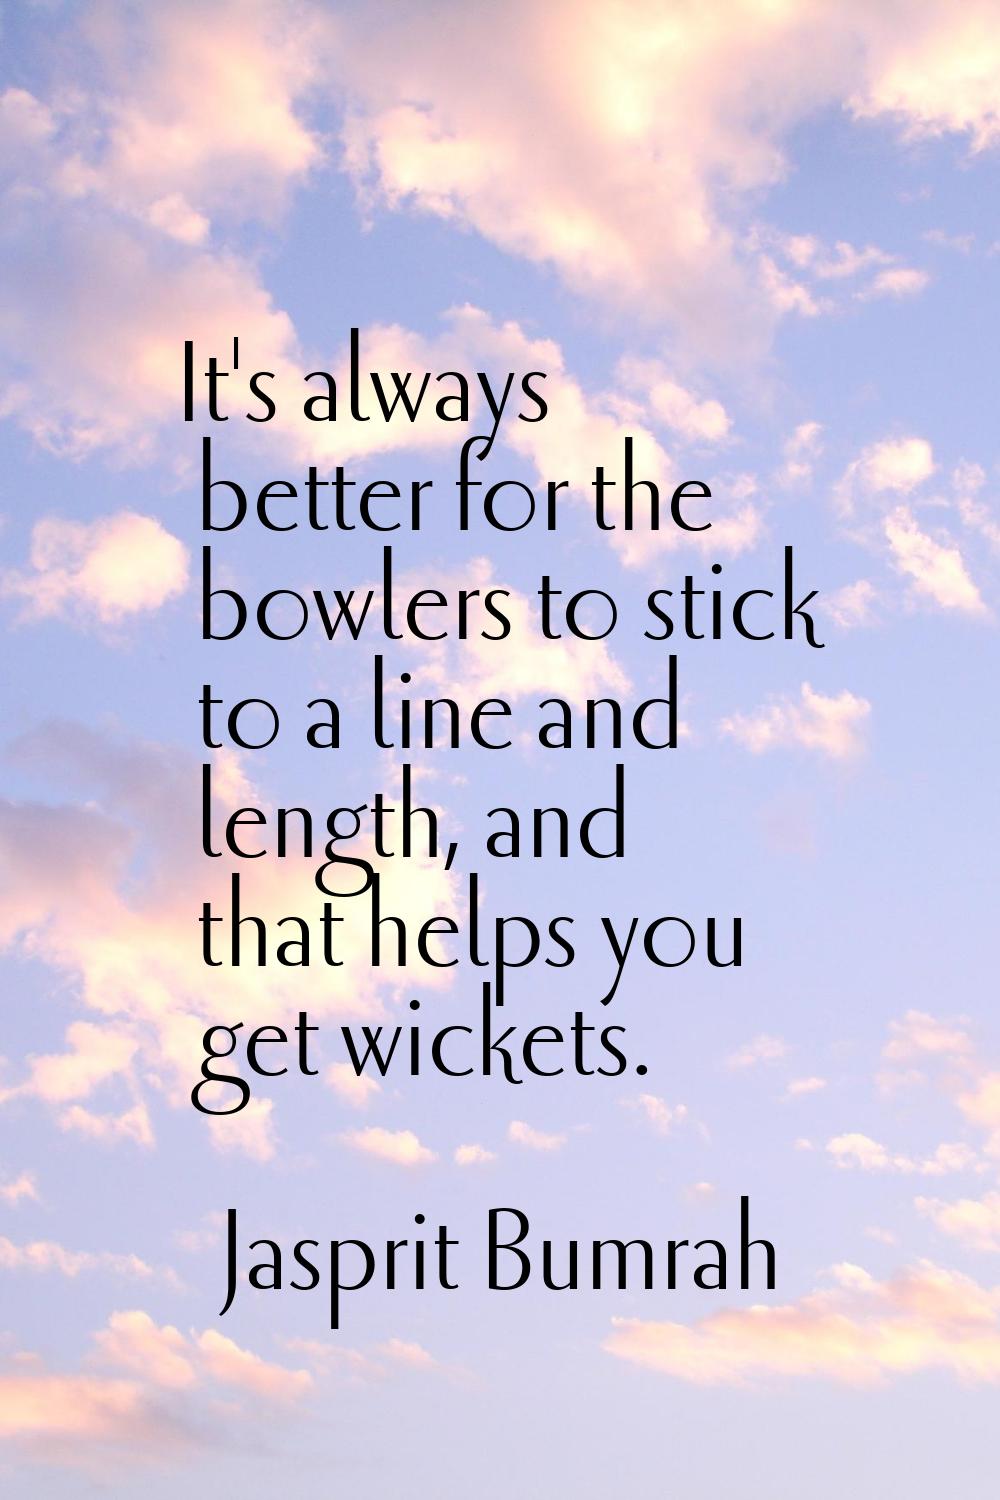 It's always better for the bowlers to stick to a line and length, and that helps you get wickets.